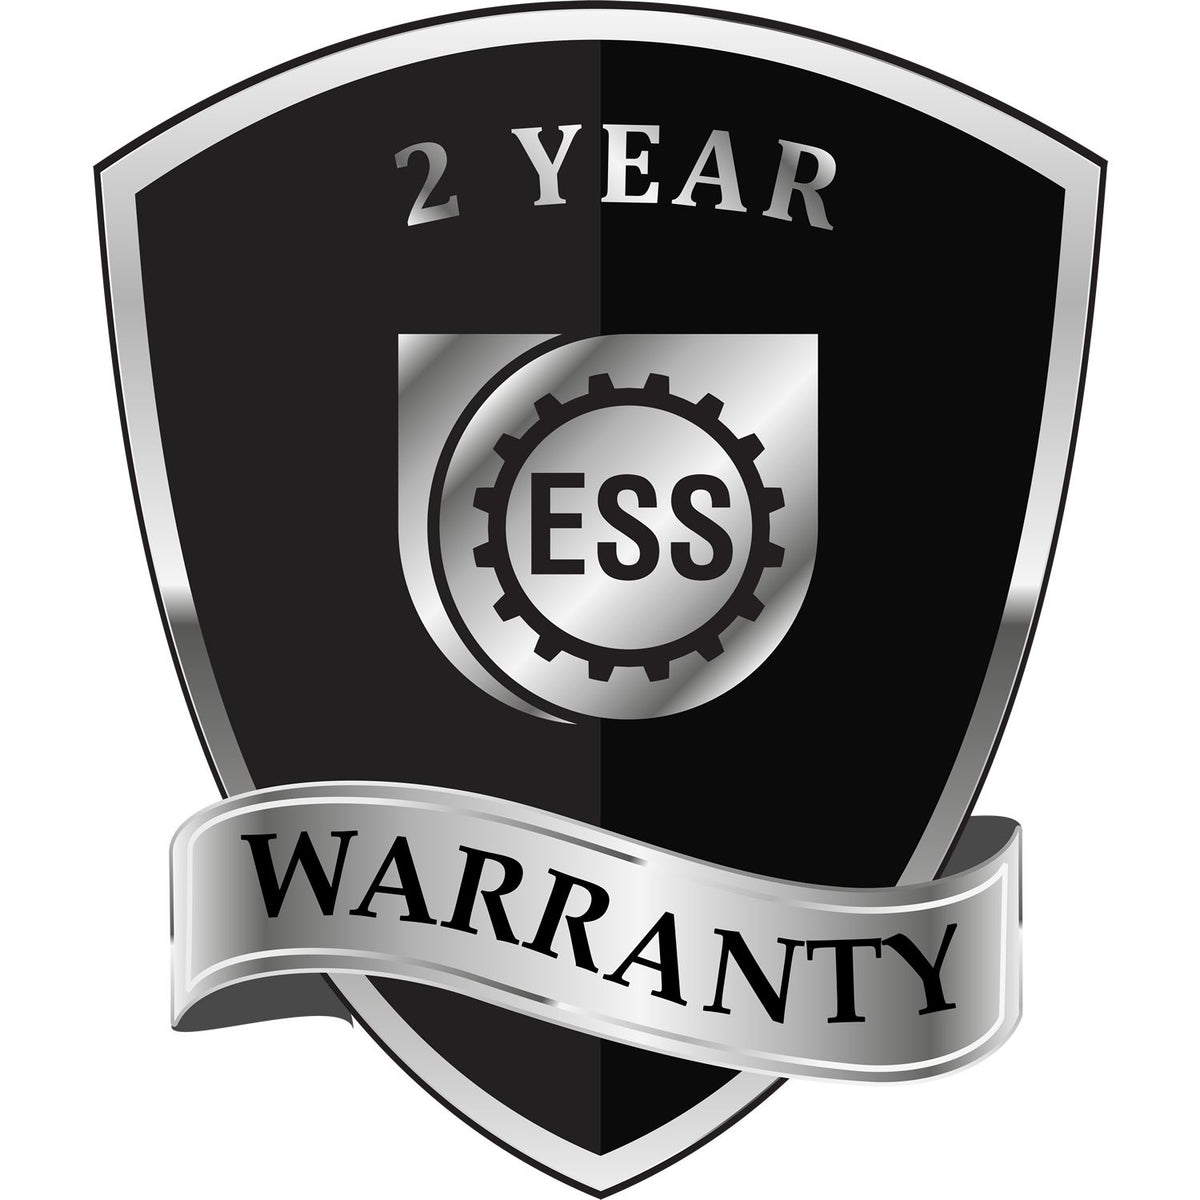 A black and silver badge or emblem showing warranty information for the Gift West Virginia Geologist Seal